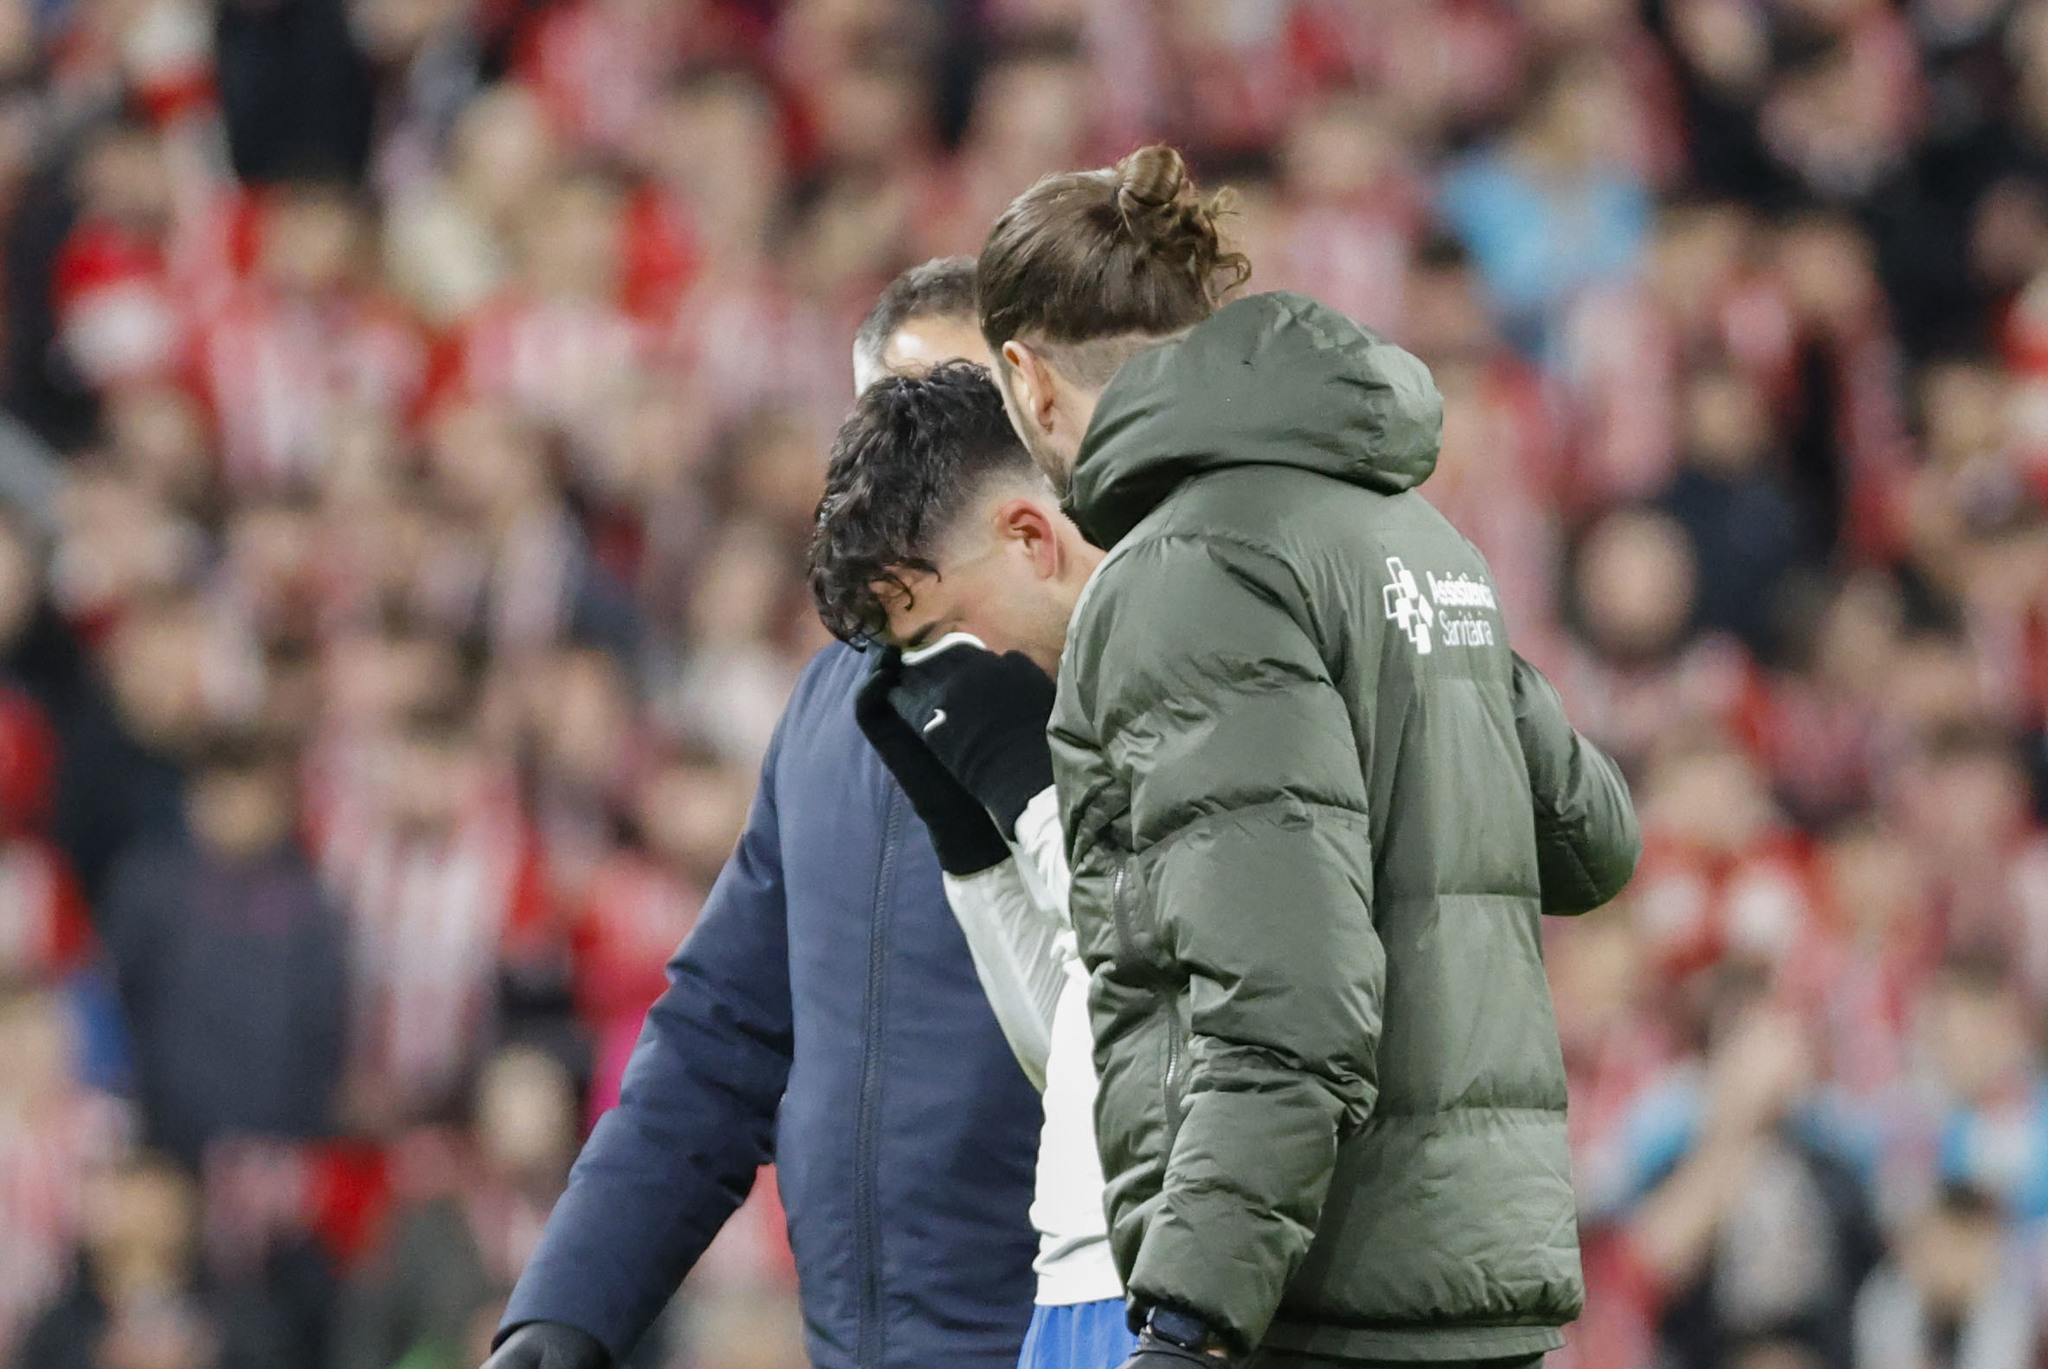 Pedri in tears after being forced to leave the game due to injury